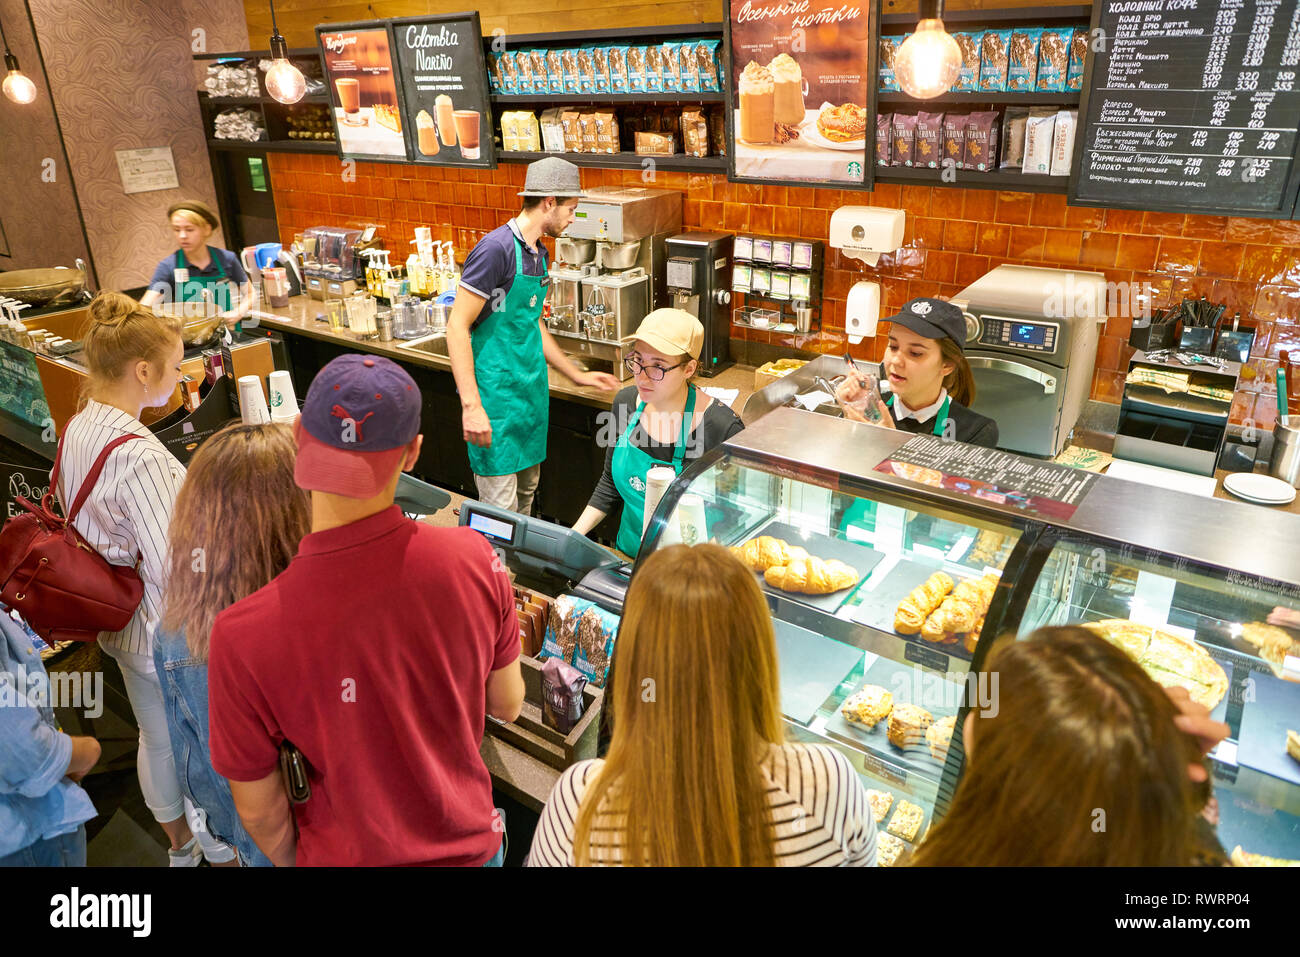 MOSCOW, RUSSIA - CIRCA OCTOBER, 2018: people staying in queue at counter service a Starbucks coffeeshop. Stock Photo